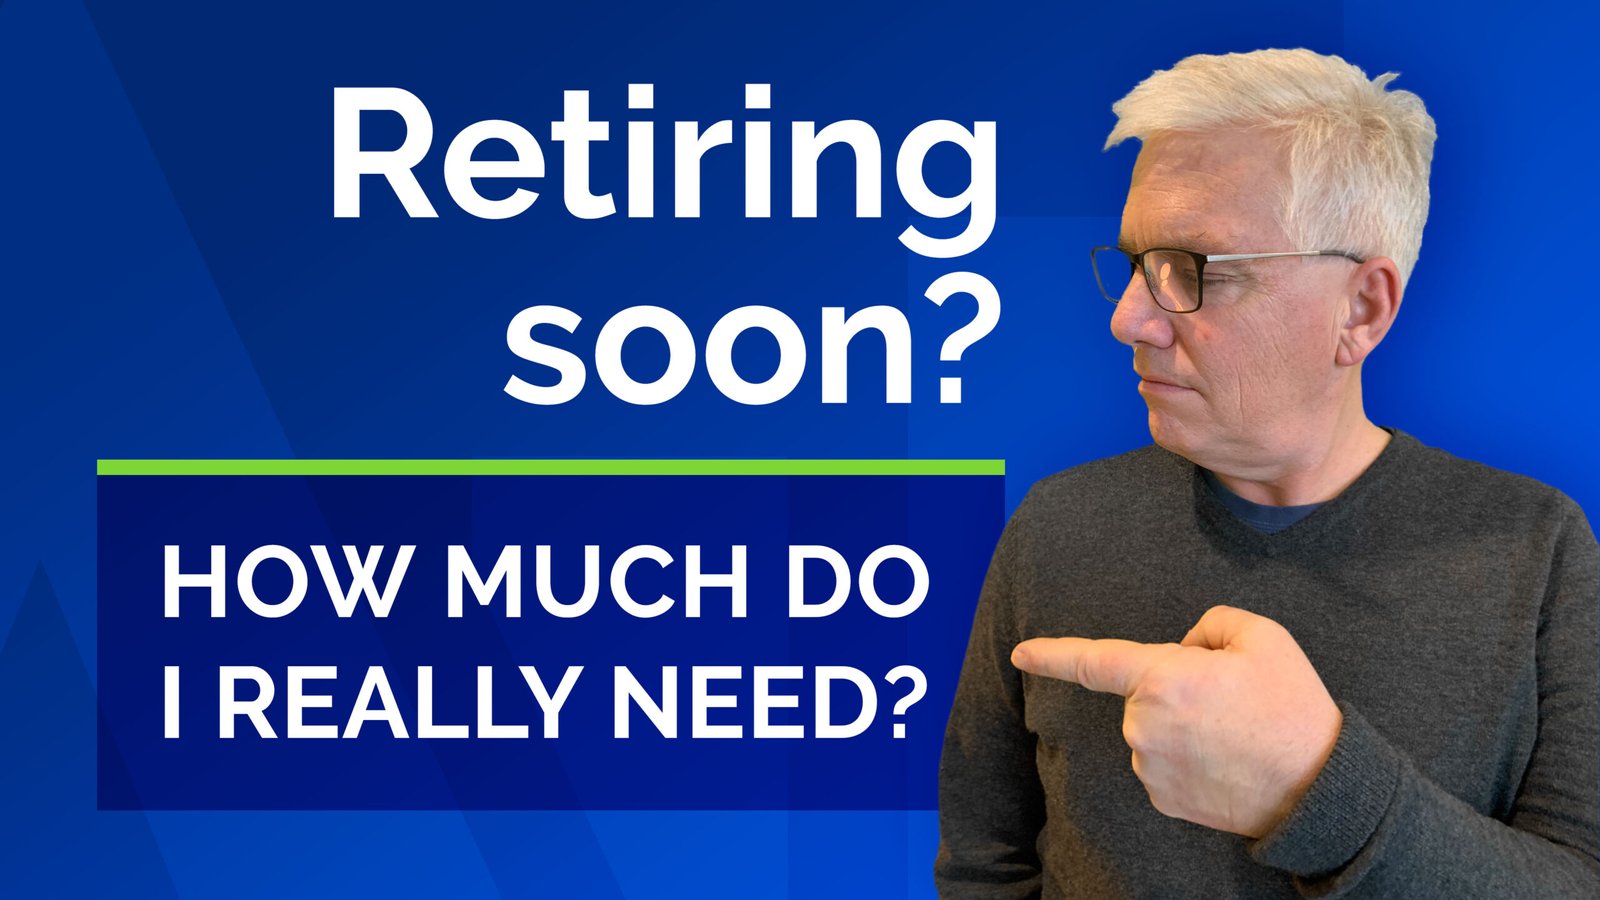 YouTube cover art for "retiring soon? How much do I really need?